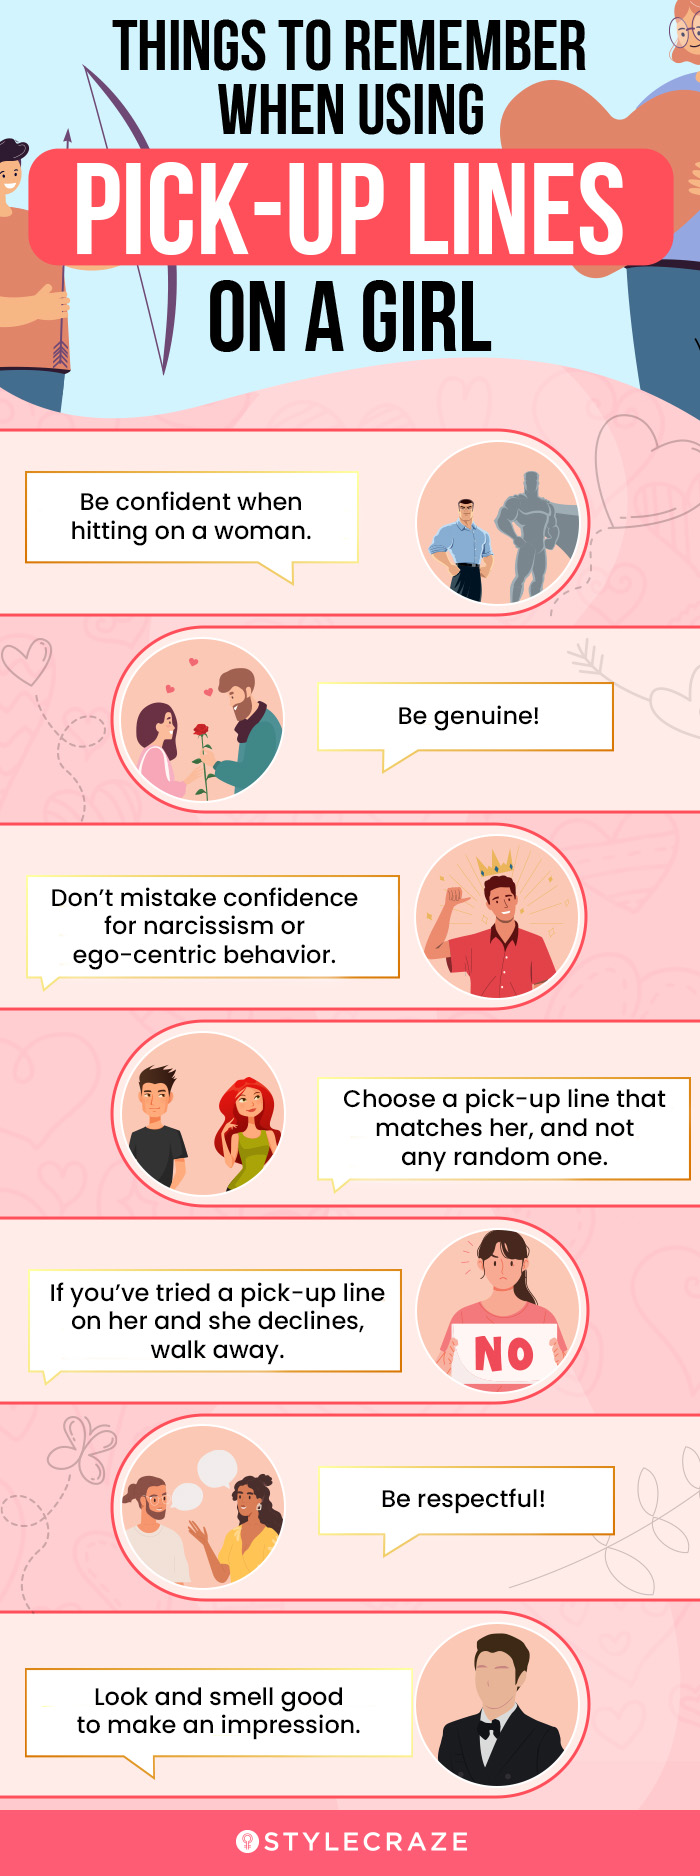 things to remember when using pick-up lines on a girl(infographic)